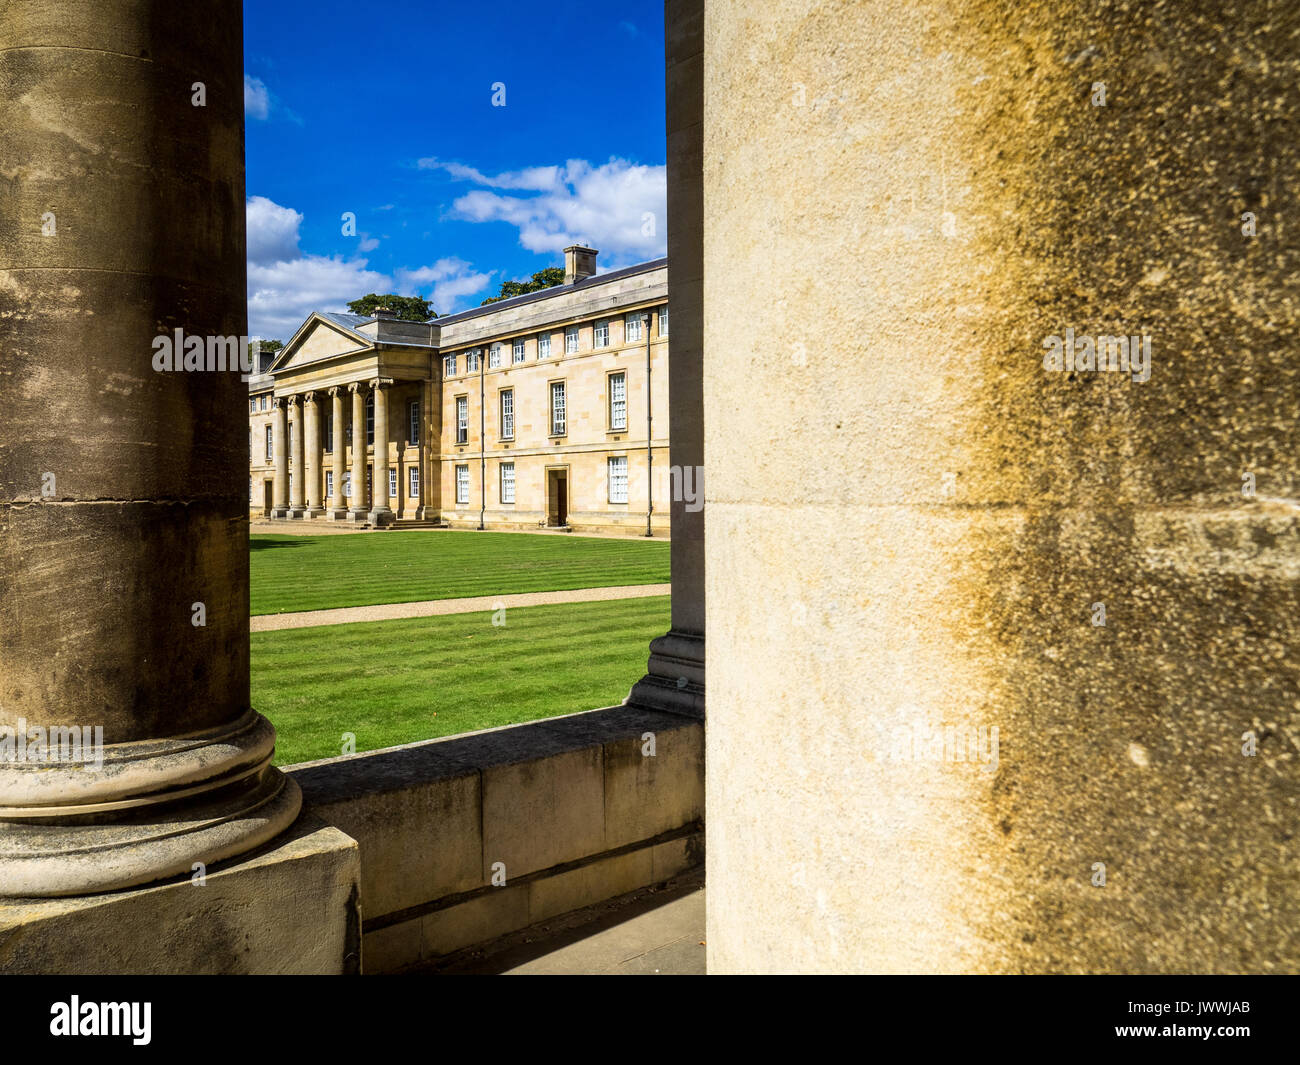 Downing College Cambridge - classical buildings and lawns in Downing College, part of the University of Cambridge, founded in 1800 Stock Photo